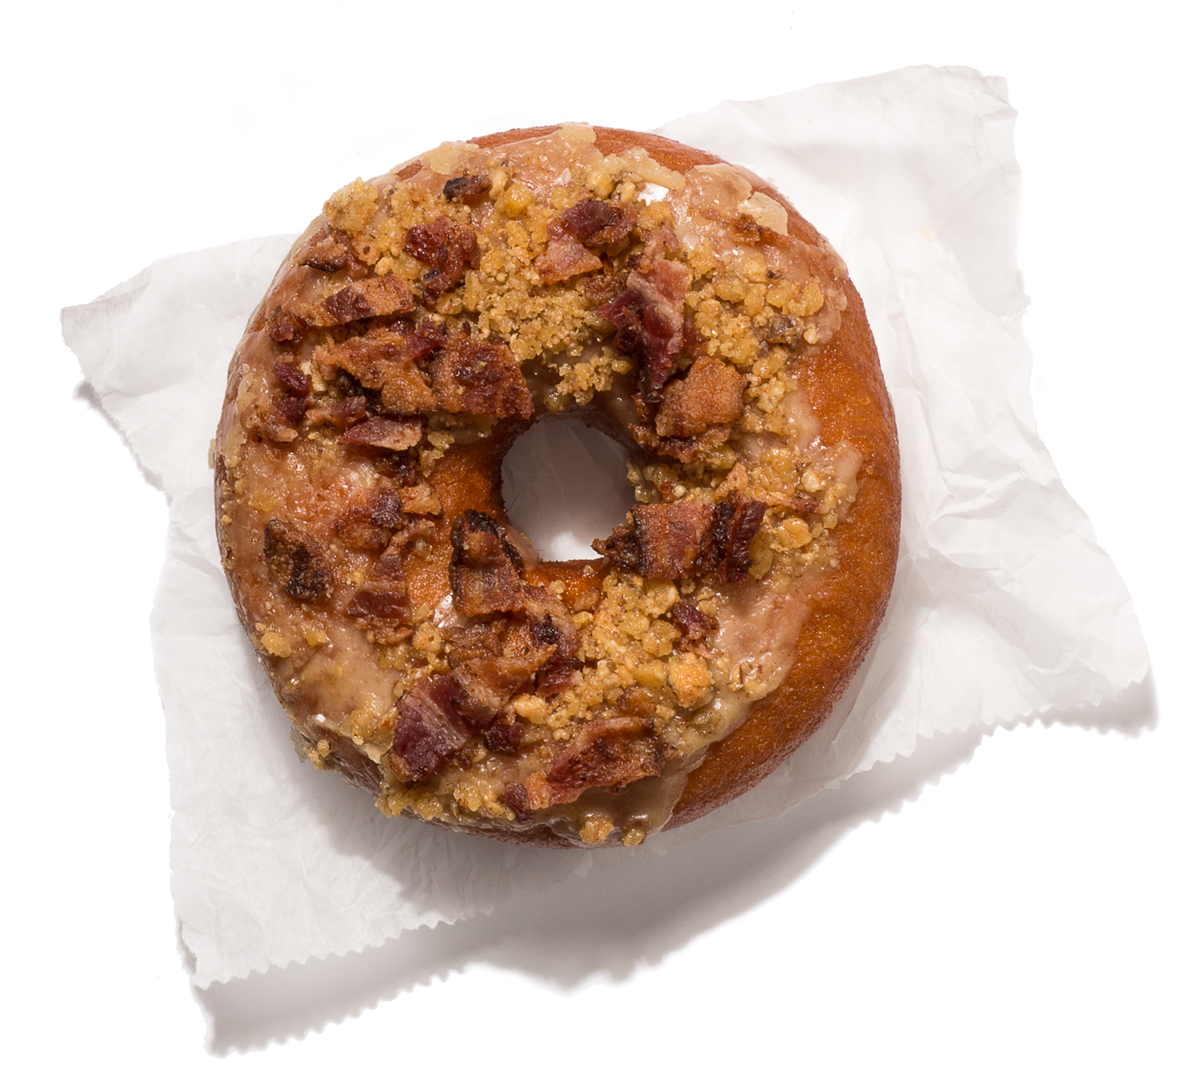 Island Creek Oyster Bar's new brown butter bacon doughnut with pecan toffee crumble. Photo by Toan Trinh